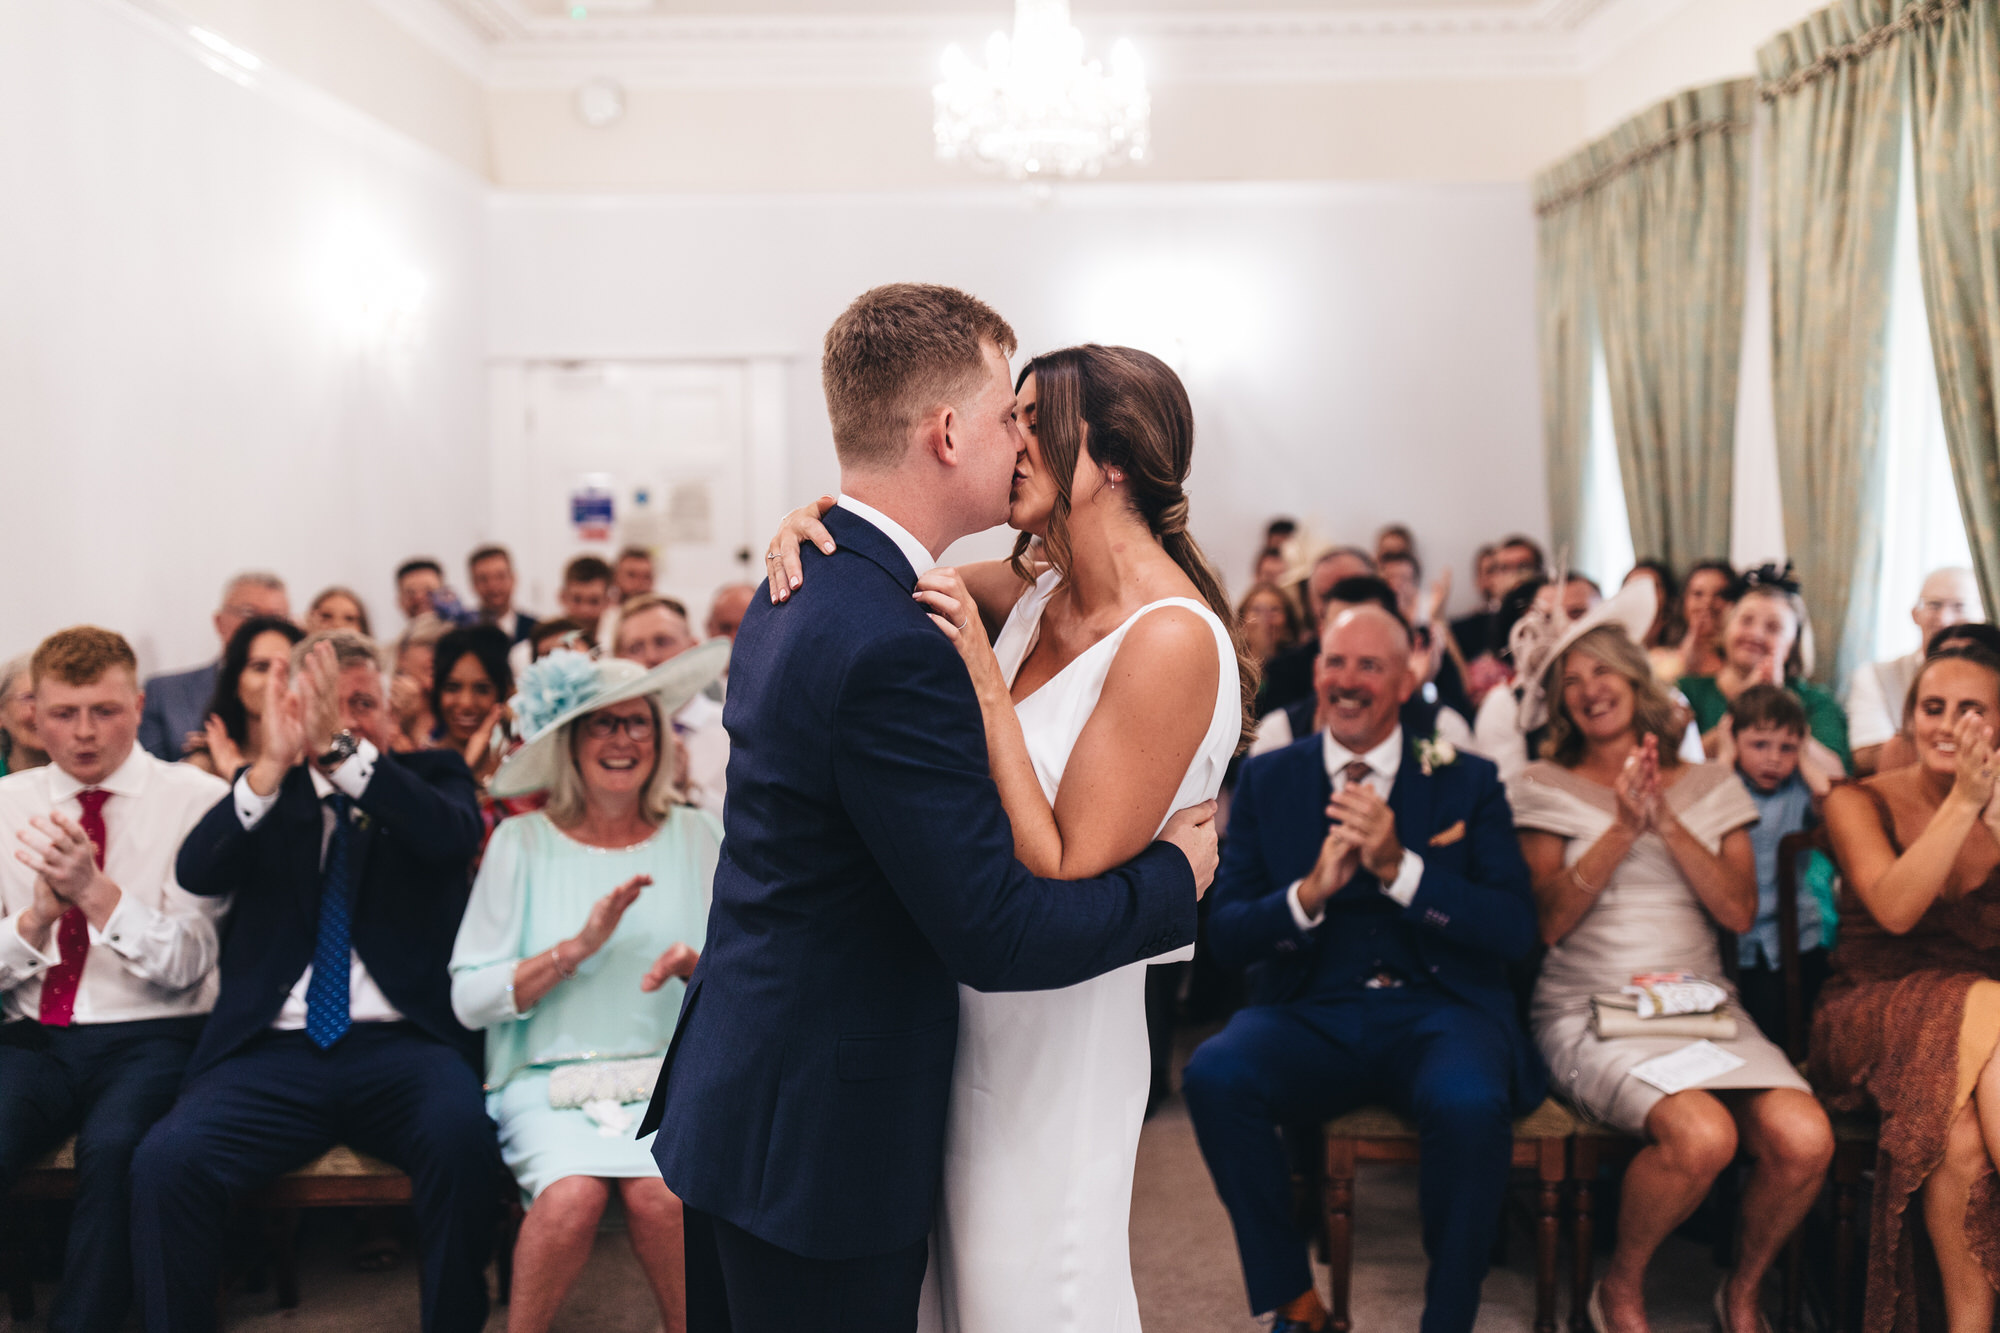 groom and bride kissing at ceremony, guests applaud, clapping